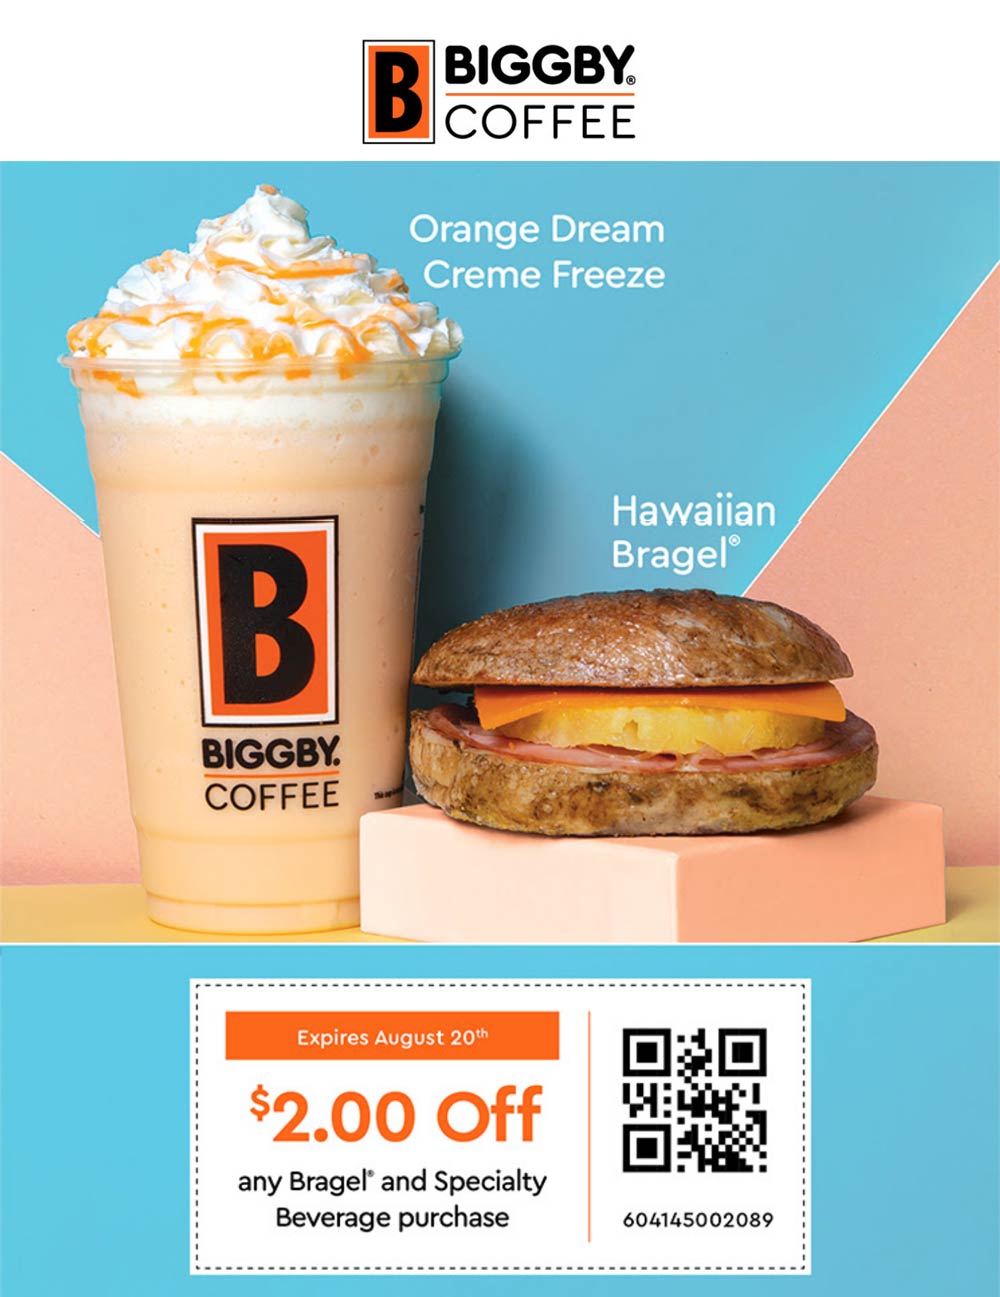 Biggby Coffee coupons & promo code for [December 2022]